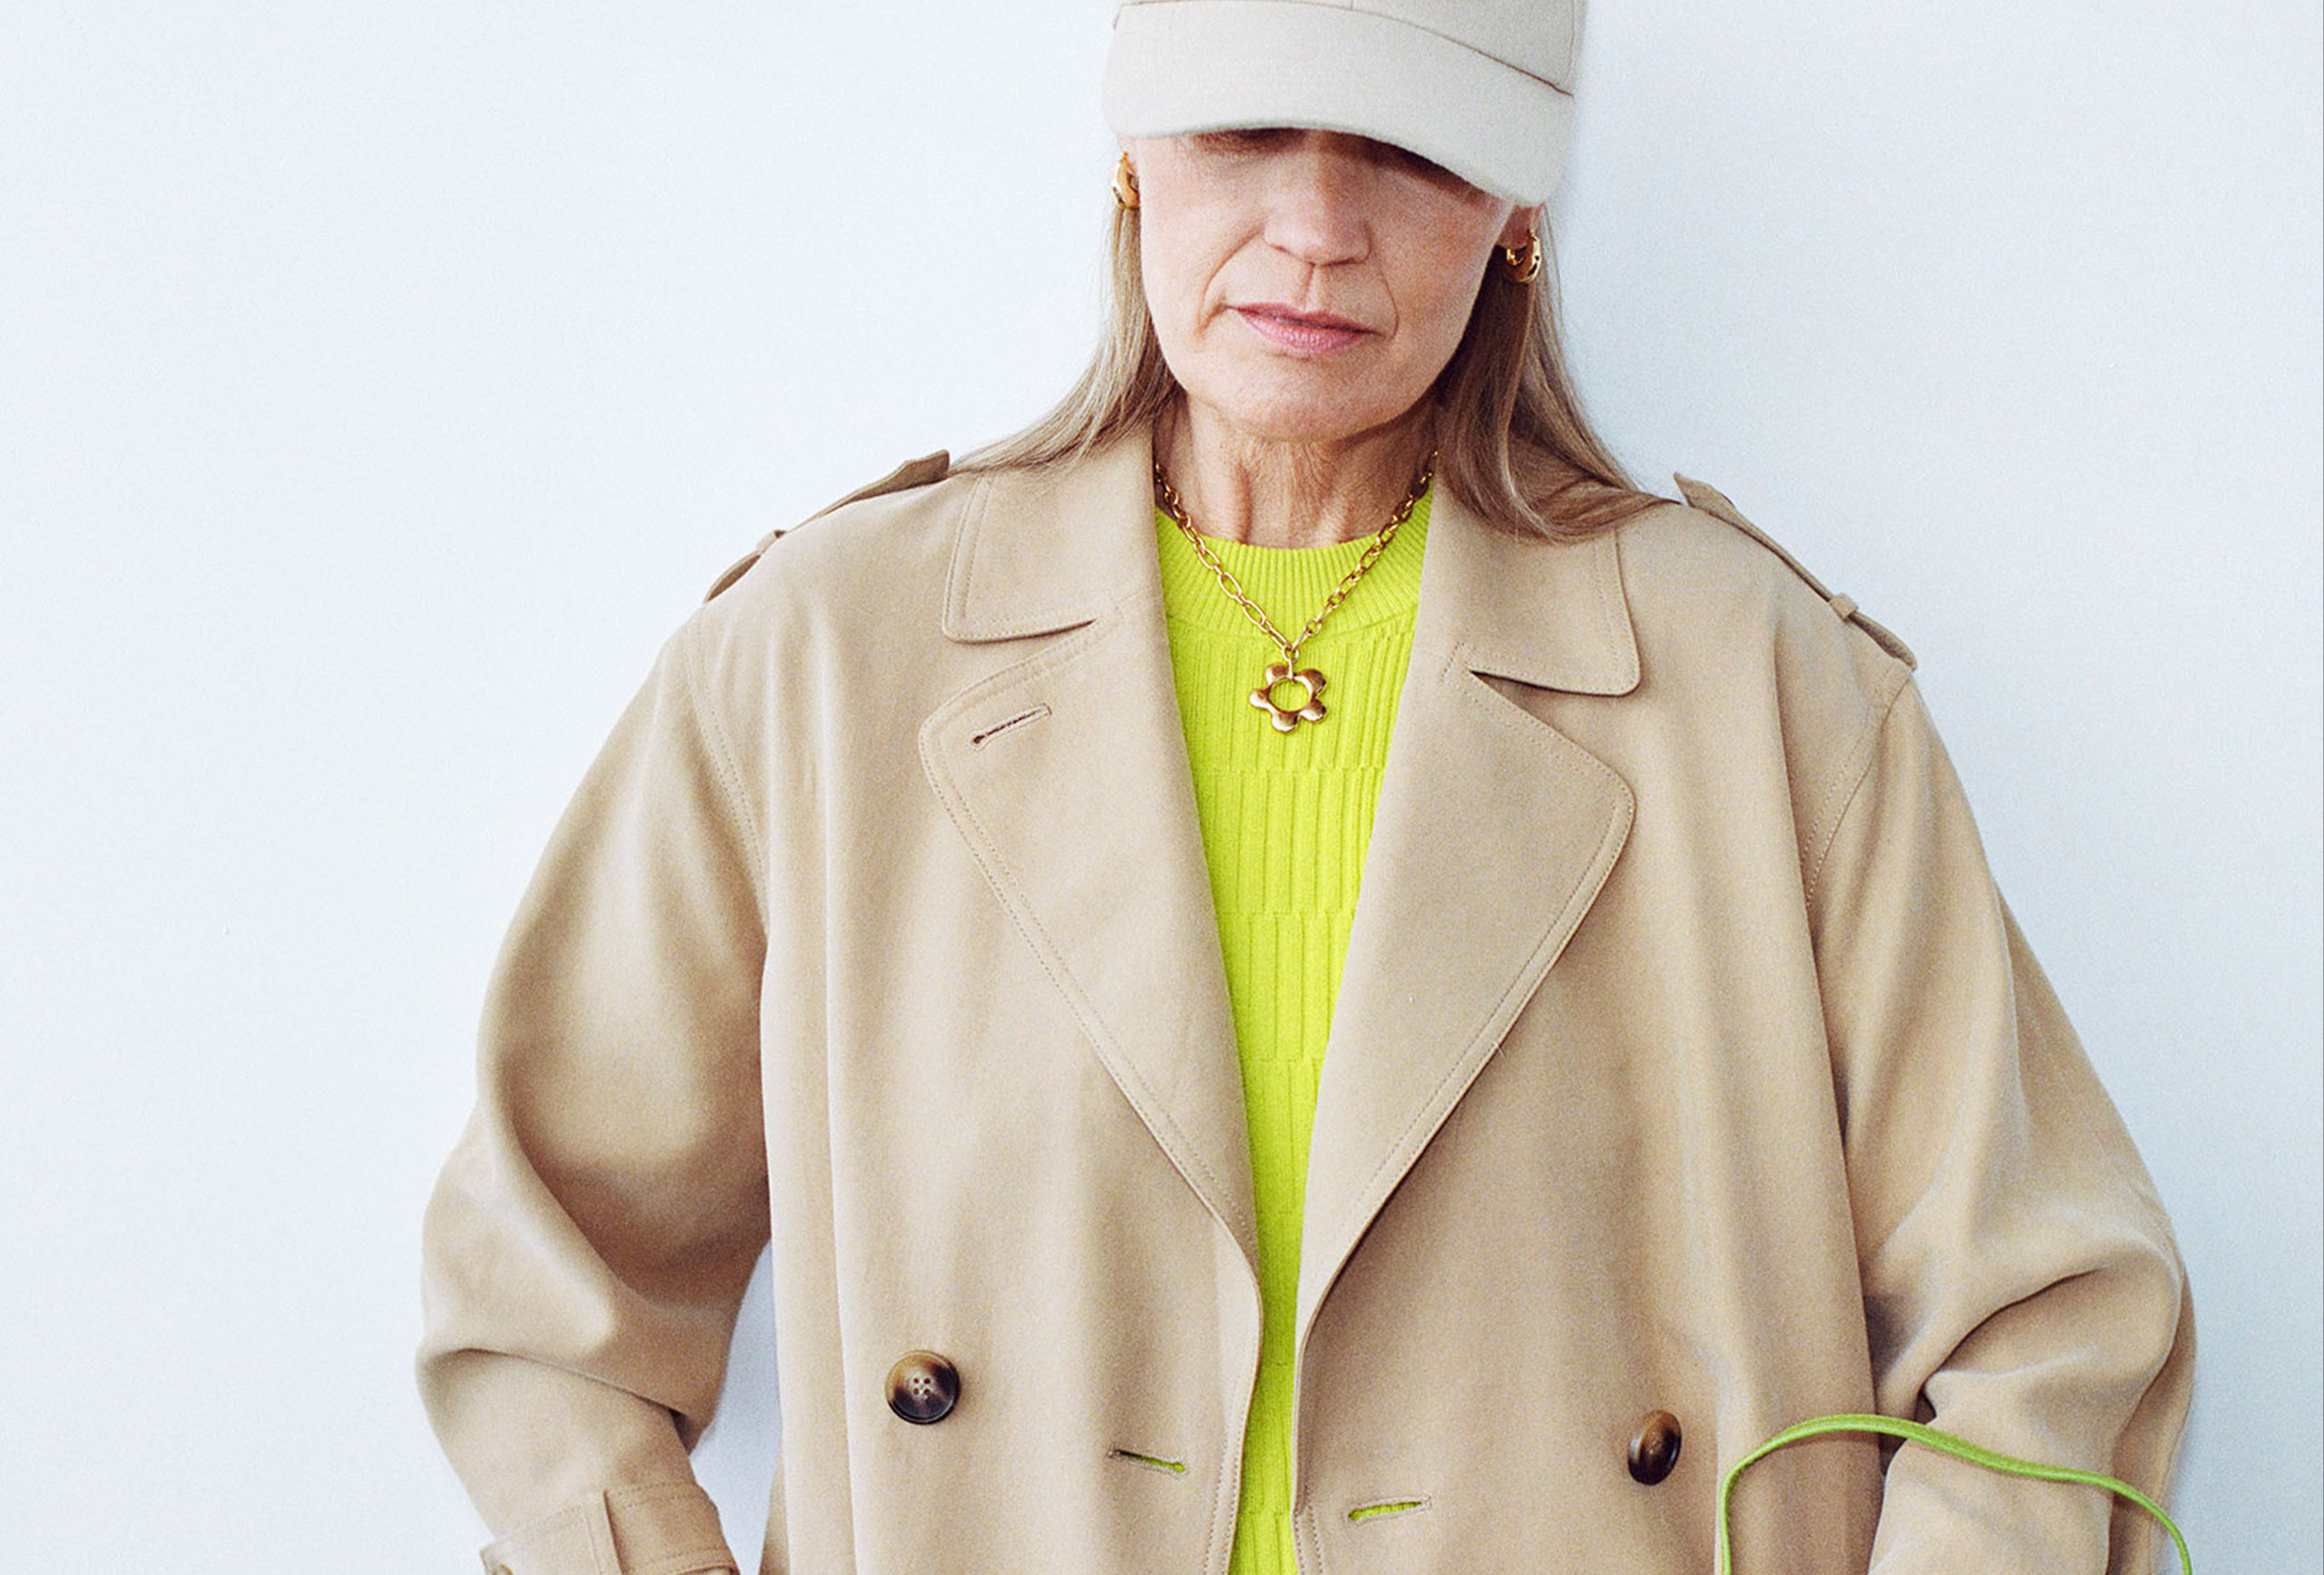 woman waeing a basball cap and neon yelllow dresss and tan trench coat